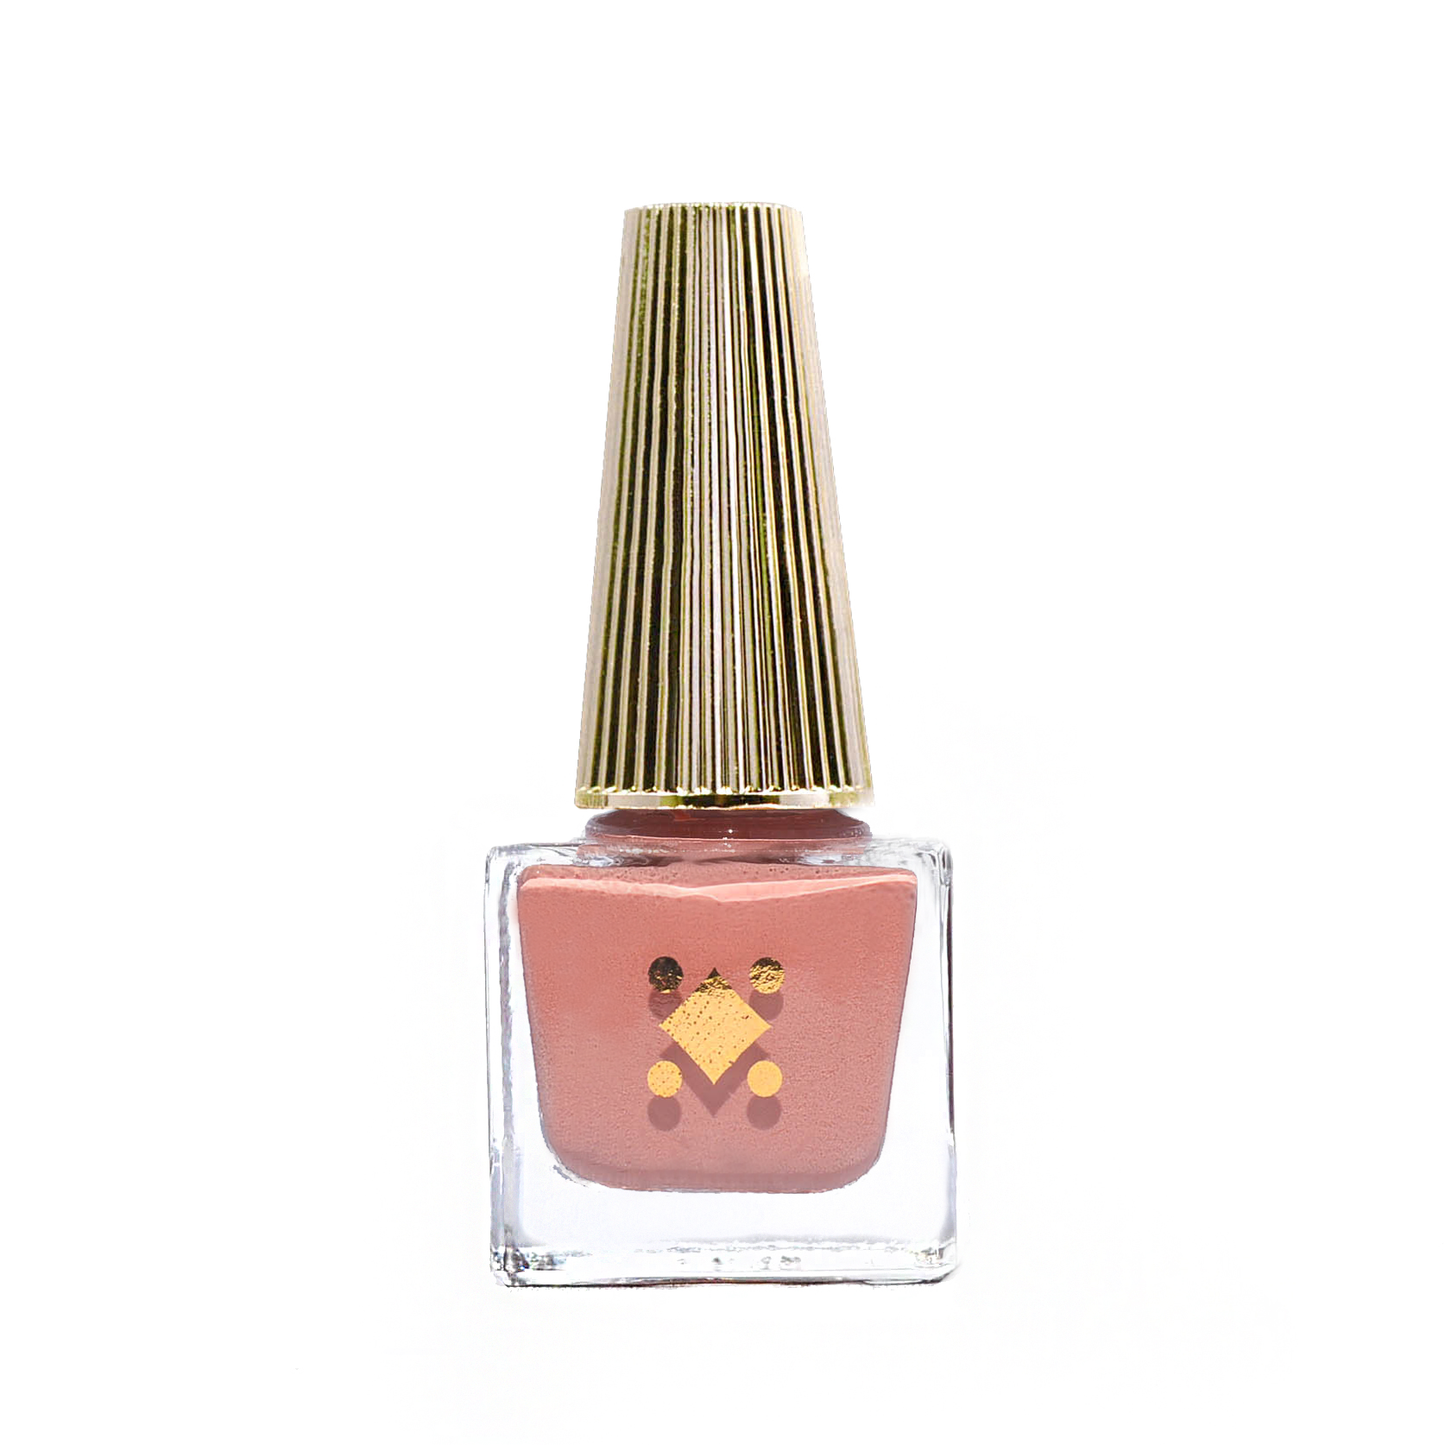 INSTAFAMOUS - 6ML - nude pink crème nail lacquer by Deco Miami